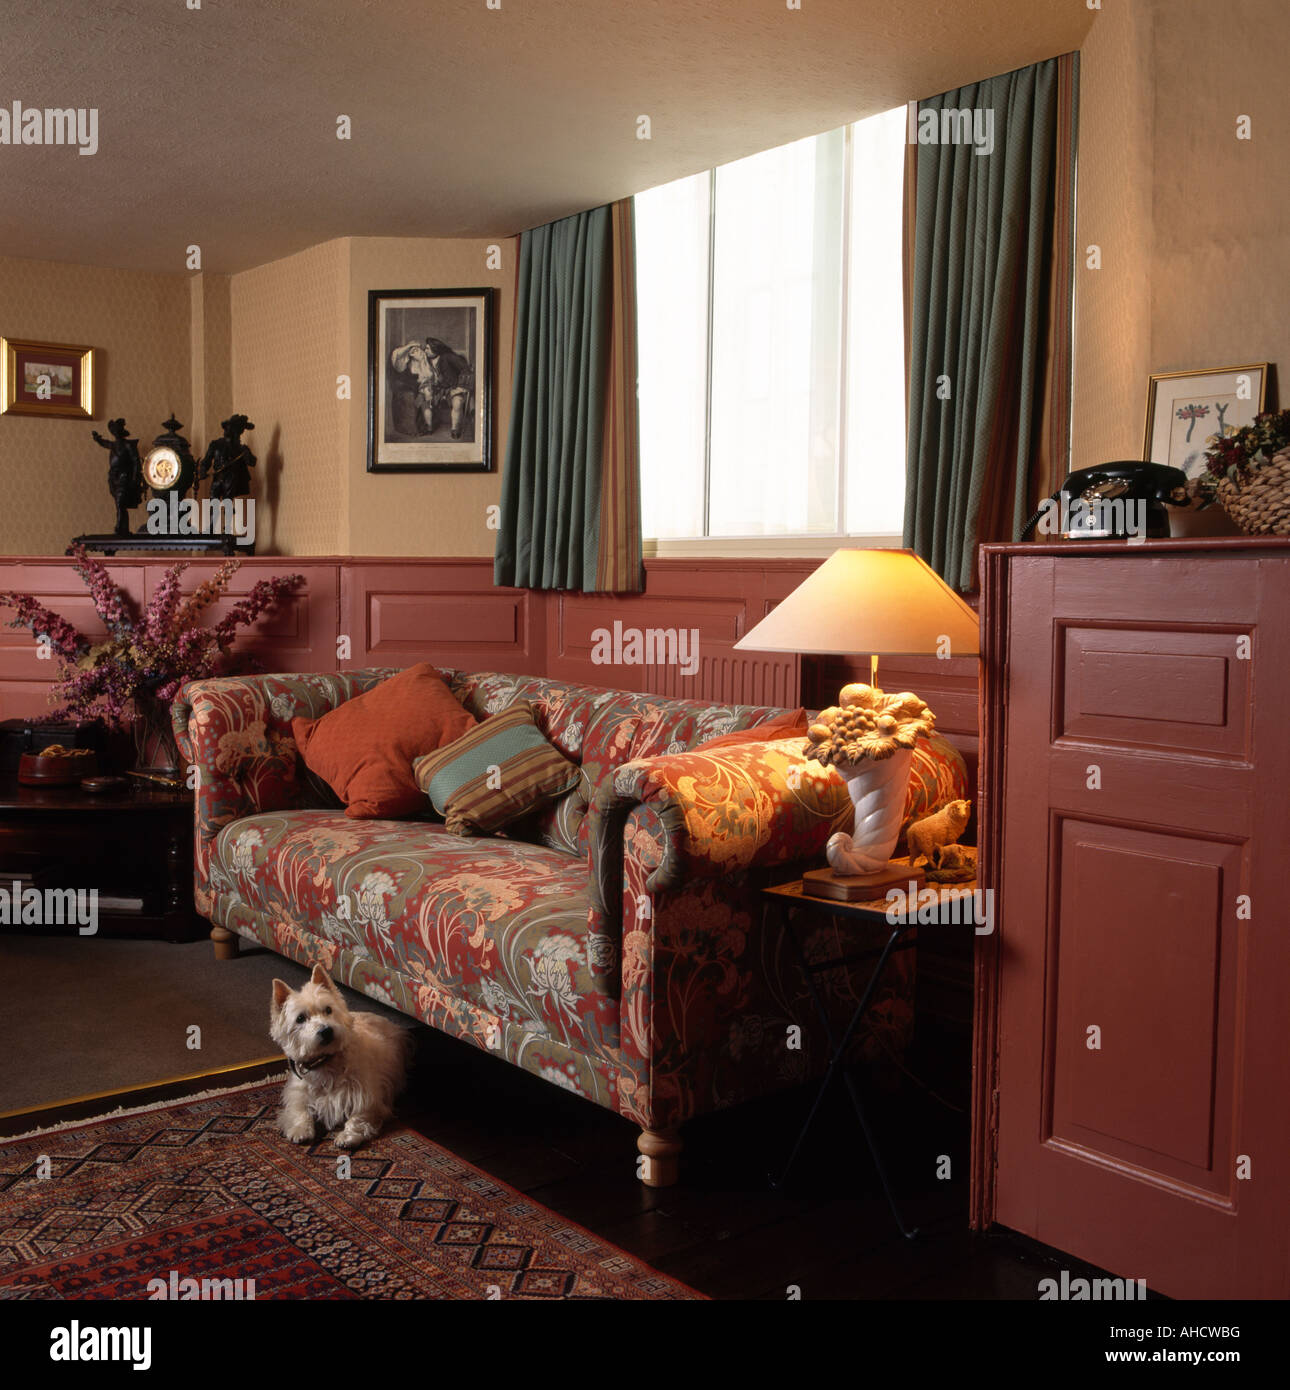 Small white dog in eighties living room with patterned Chesterfield sofa and brown half panelling on walls Stock Photo